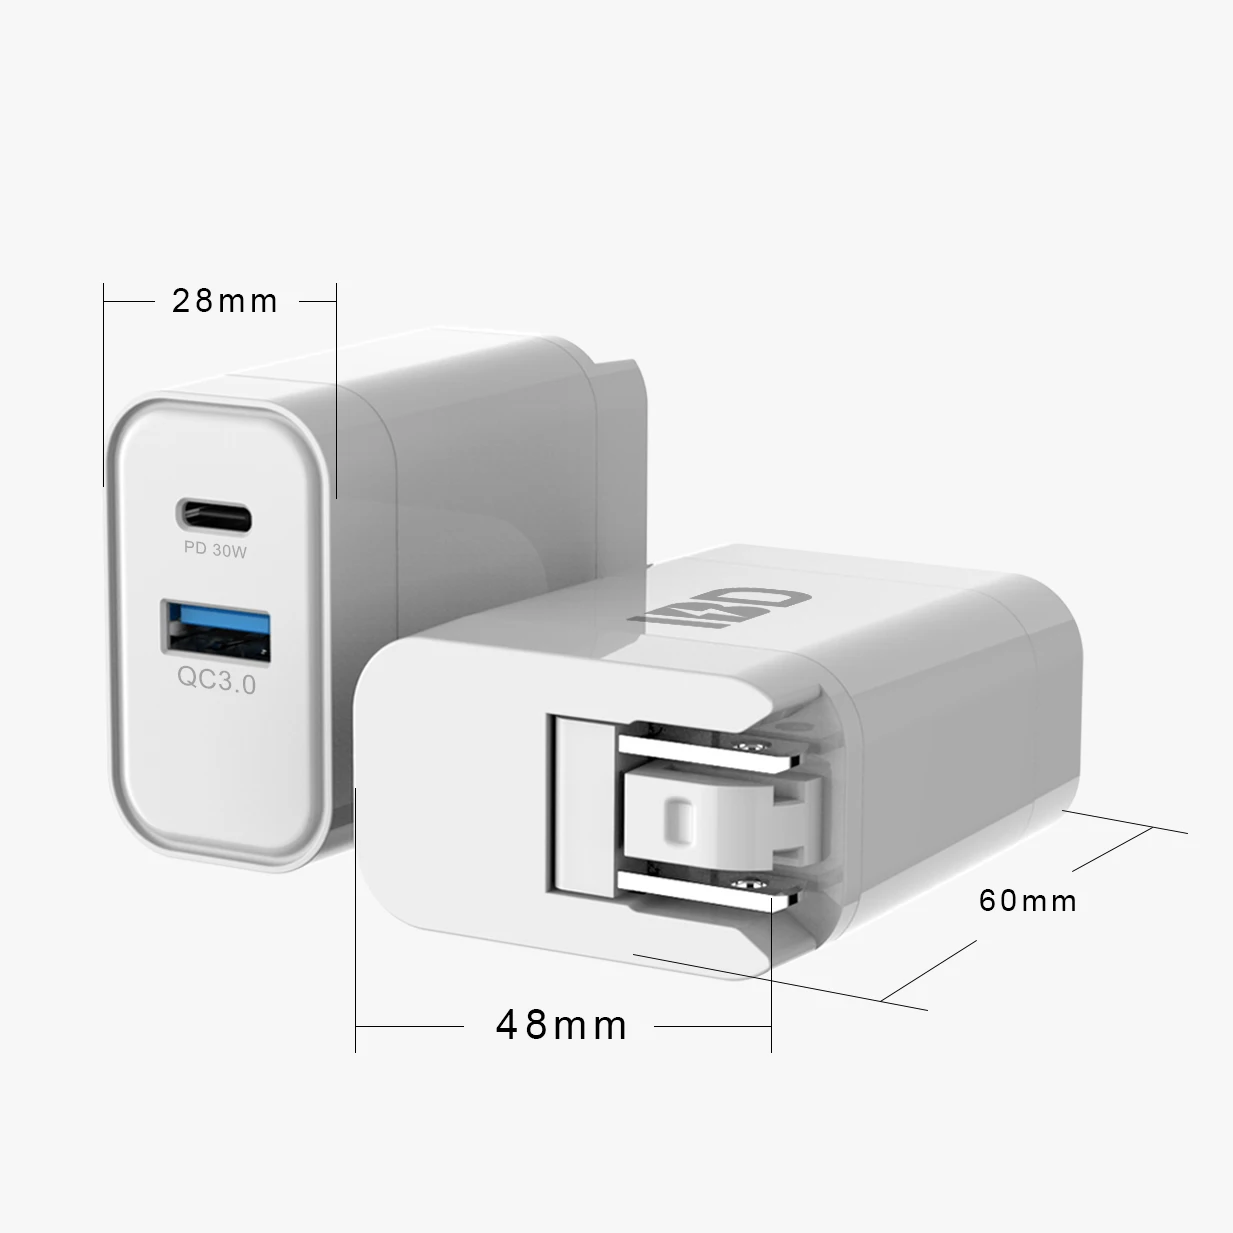 

IBD 2020 Original 30W Wall Charger Phone Usb Outlet,PD Usb Wall Charger Qc 3.0 For Mobile Phone